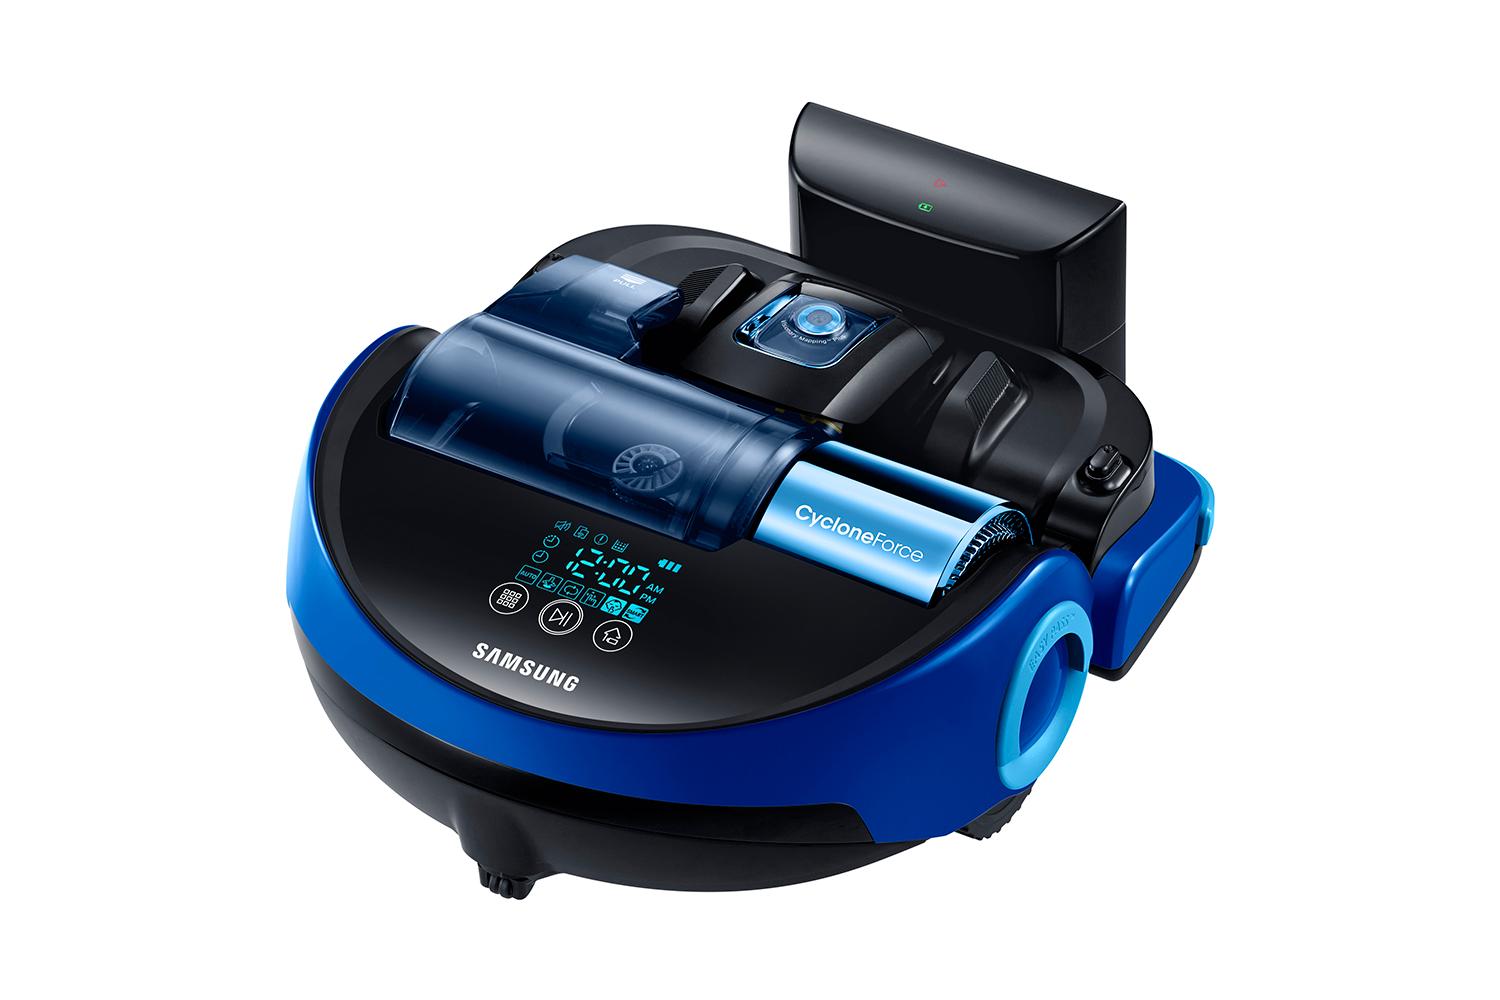 samsungs home appliances at ces 2015 samsung vr20h9030ub 009 recharge blue